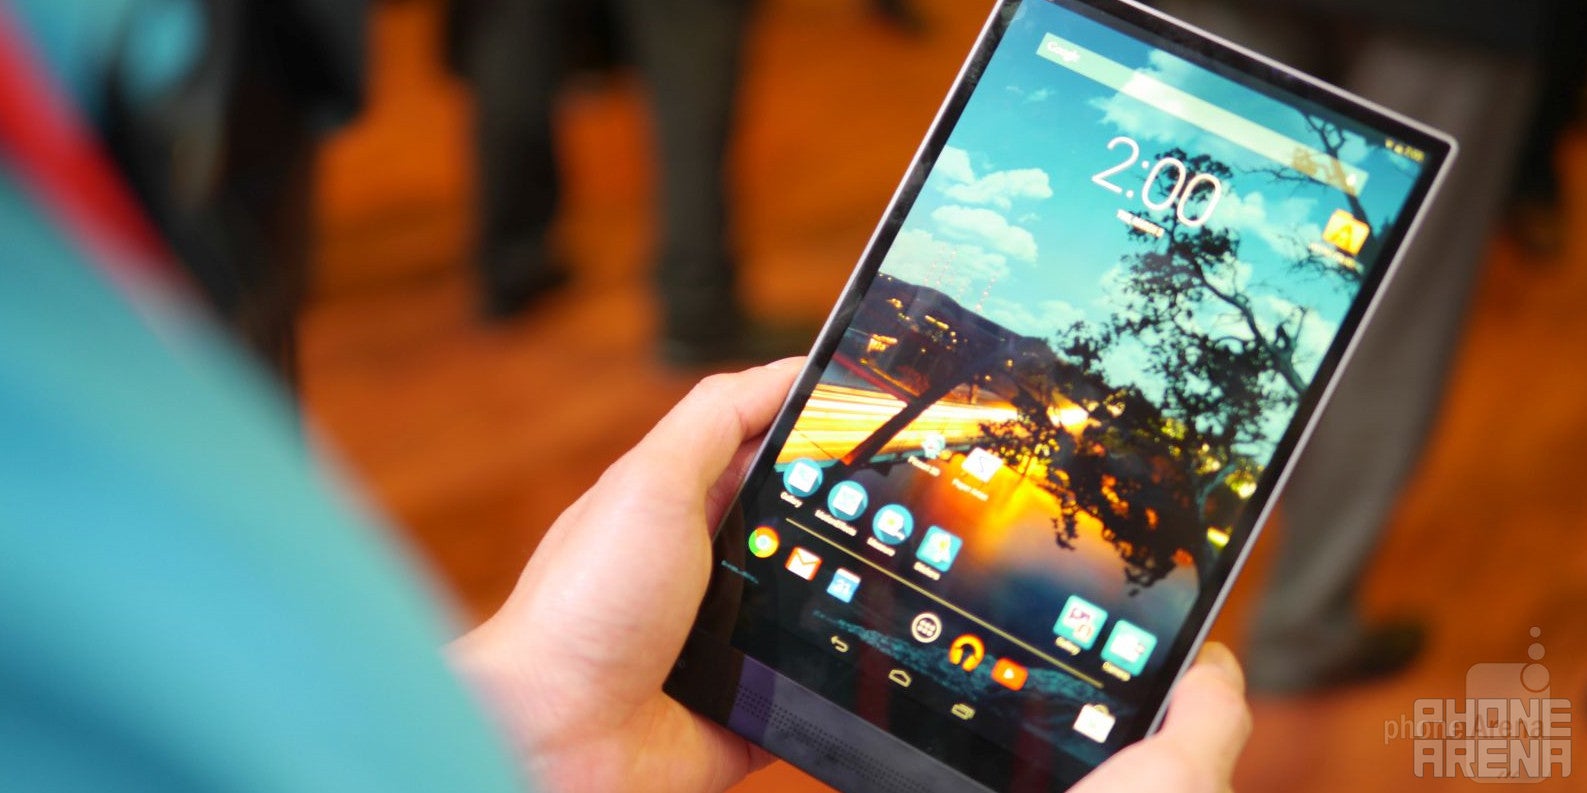 Dell Venue 8 7000 Series Tablet hands-on